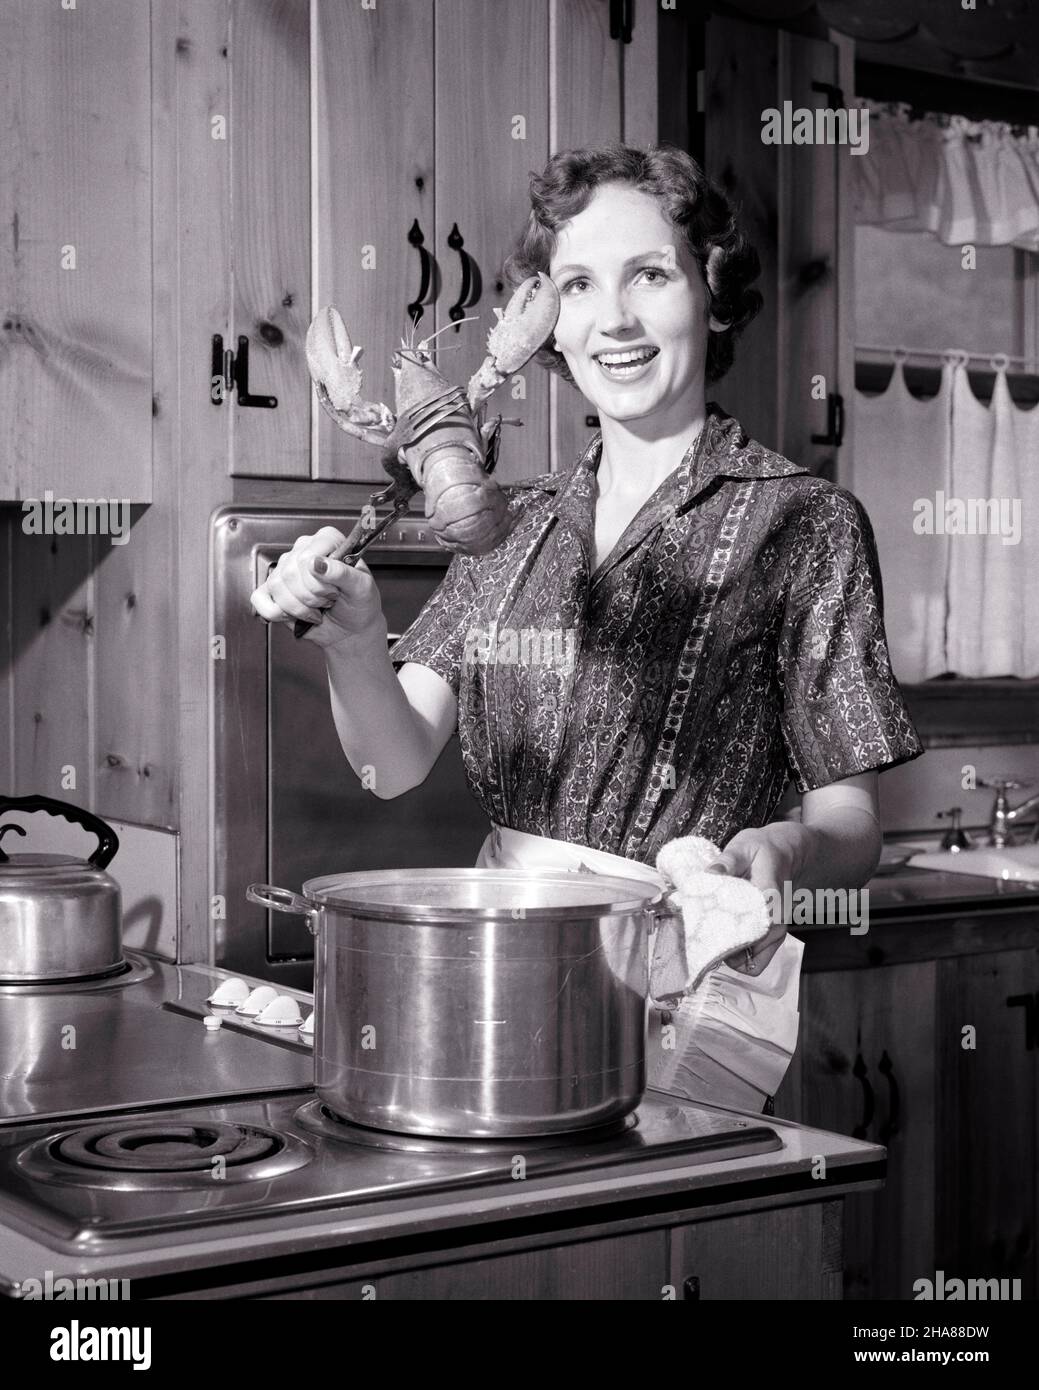 1950s 1960s SMILING WOMAN HOUSEWIFE LOOKING AT CAMERA COOKING DINNER ABOUT TO PUT LOBSTER INTO POT OF BOILING WATER ON STOVE - h3314 DEB001 HARS HOME LIFE LUXURY PREPARING HALF-LENGTH LADIES PERSONS ABOUT EXPRESSIONS B&W EYE CONTACT HOMEMAKER PUT HOMEMAKERS CHEERFUL CHOICE IN INTO OF ON TO HOUSEWIVES SMILES CONCEPTUAL BOILING JOYFUL STYLISH DEB001 YOUNG ADULT WOMAN BLACK AND WHITE CAUCASIAN ETHNICITY OLD FASHIONED Stock Photo